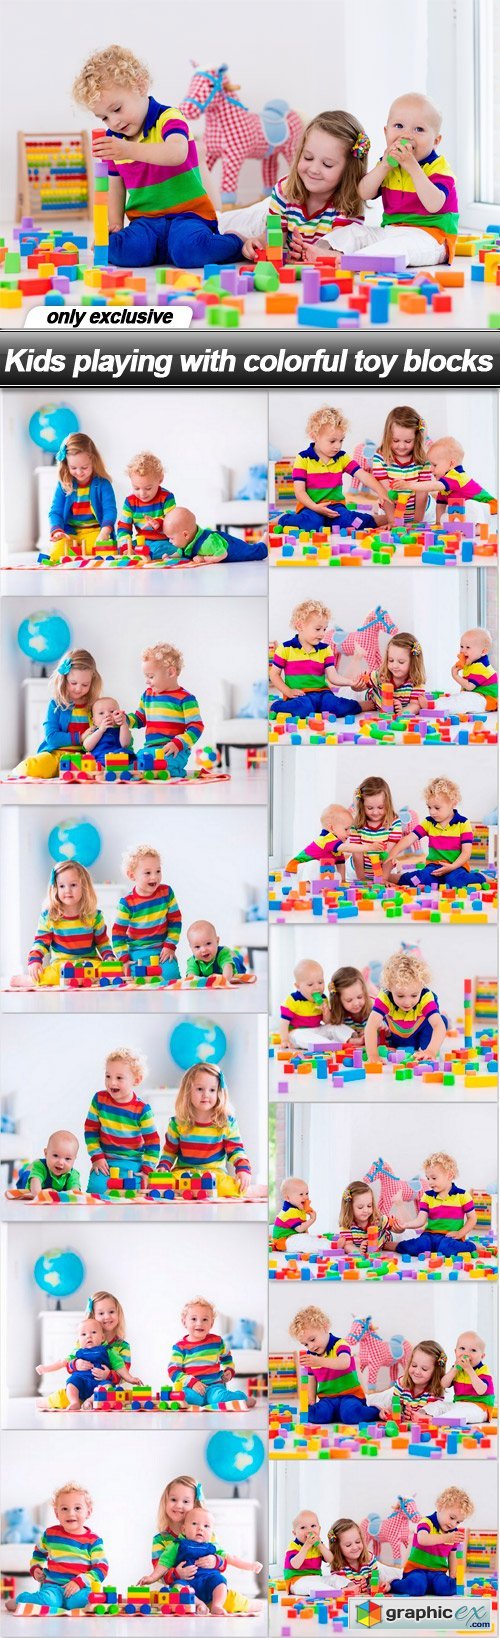 Kids playing with colorful toy blocks - 13 UHQ JPEG